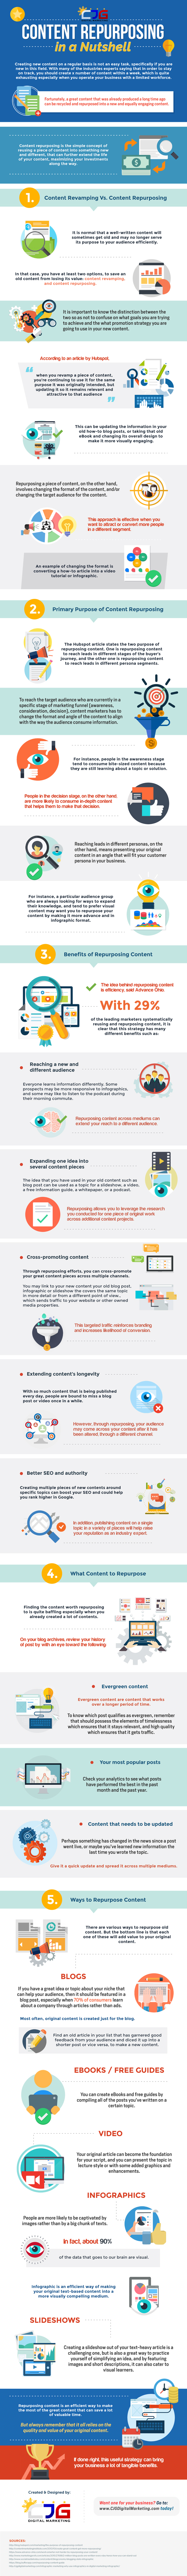 Content Repurposing in a Nutshell (Infographic) - An Infographic from CJG Digital Marketing